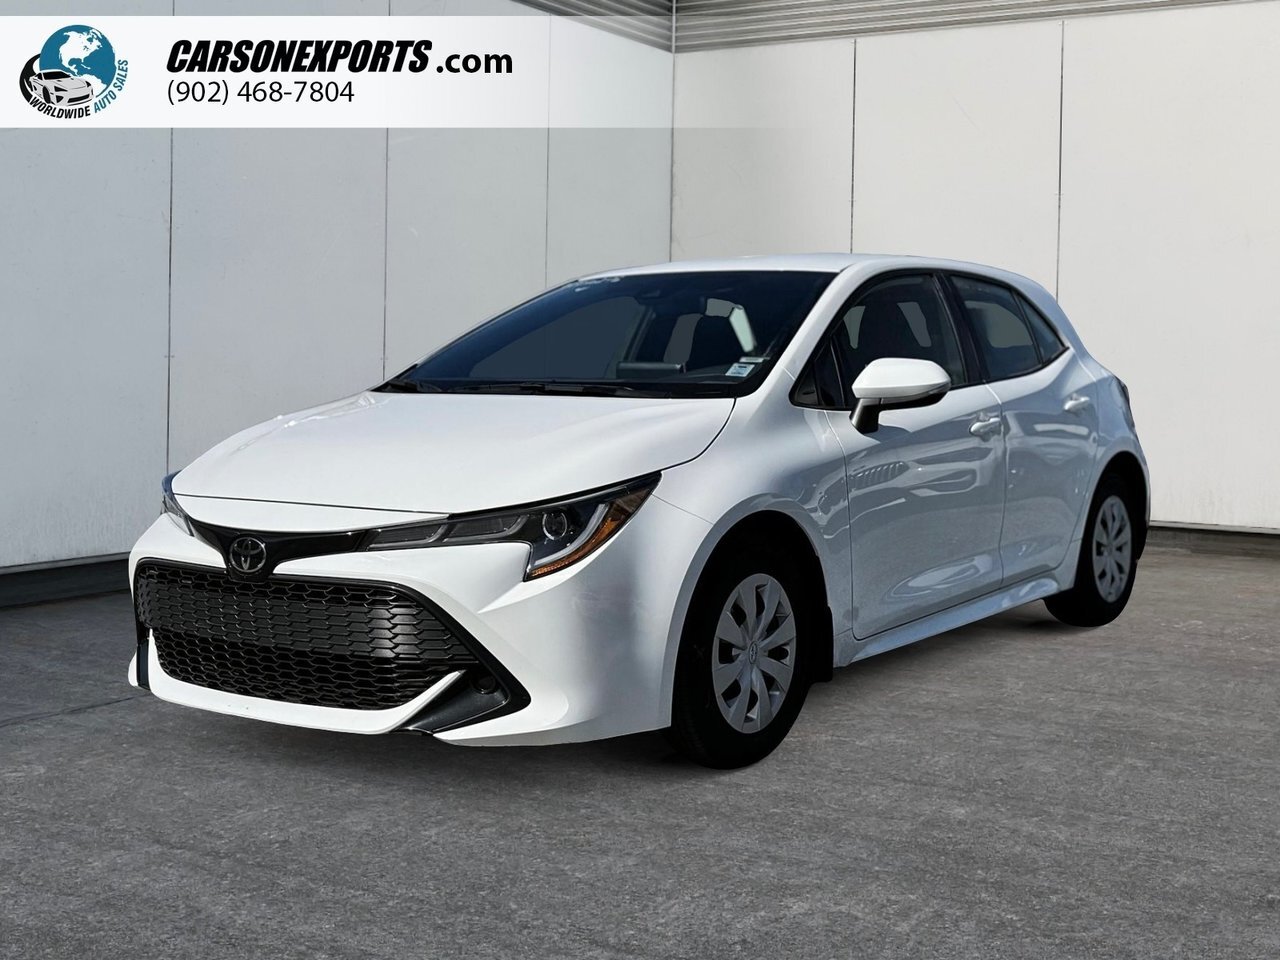 2022 Toyota Corolla Hatchback Base The best place to buy a used car. Period.